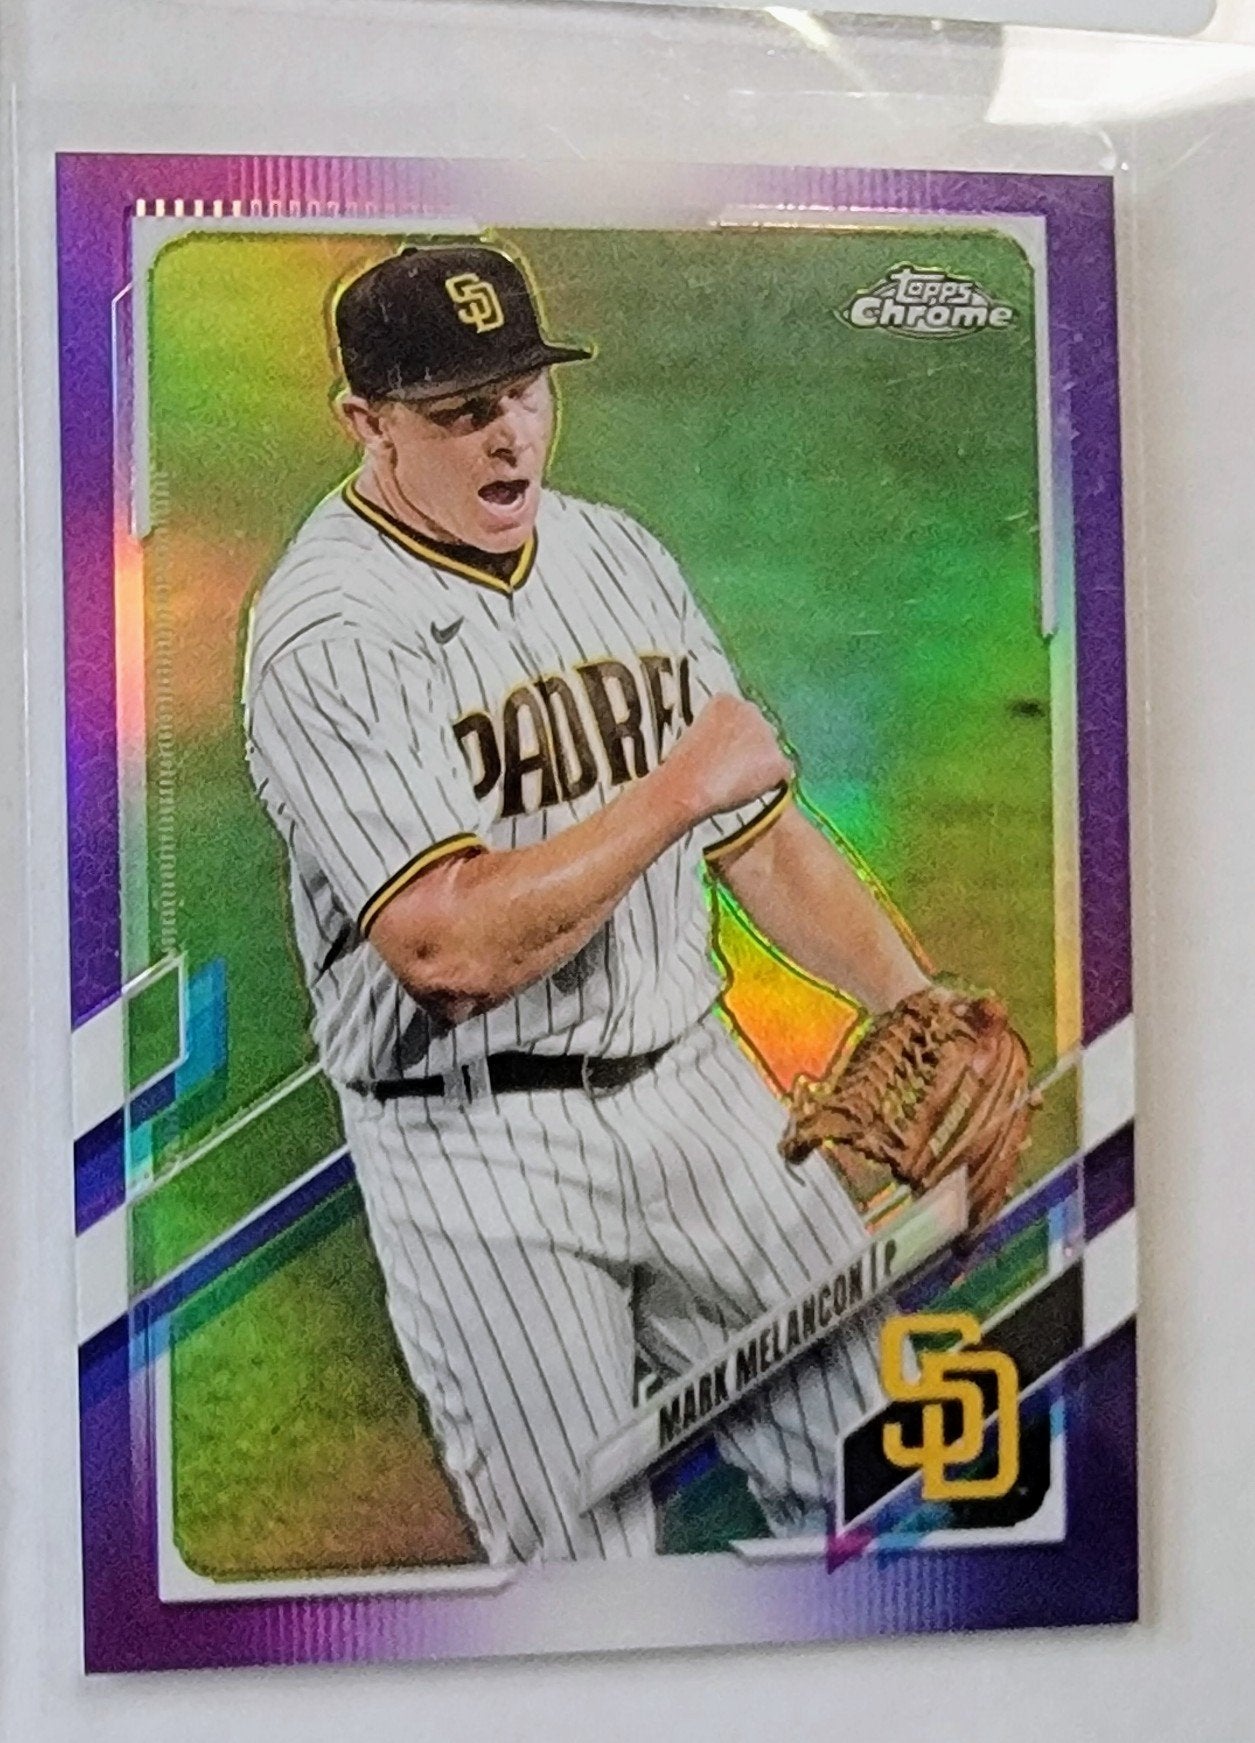 2021 Topps Chrome Update Mark Melancon Purple Refractor Baseball Card AVM1 simple Xclusive Collectibles   